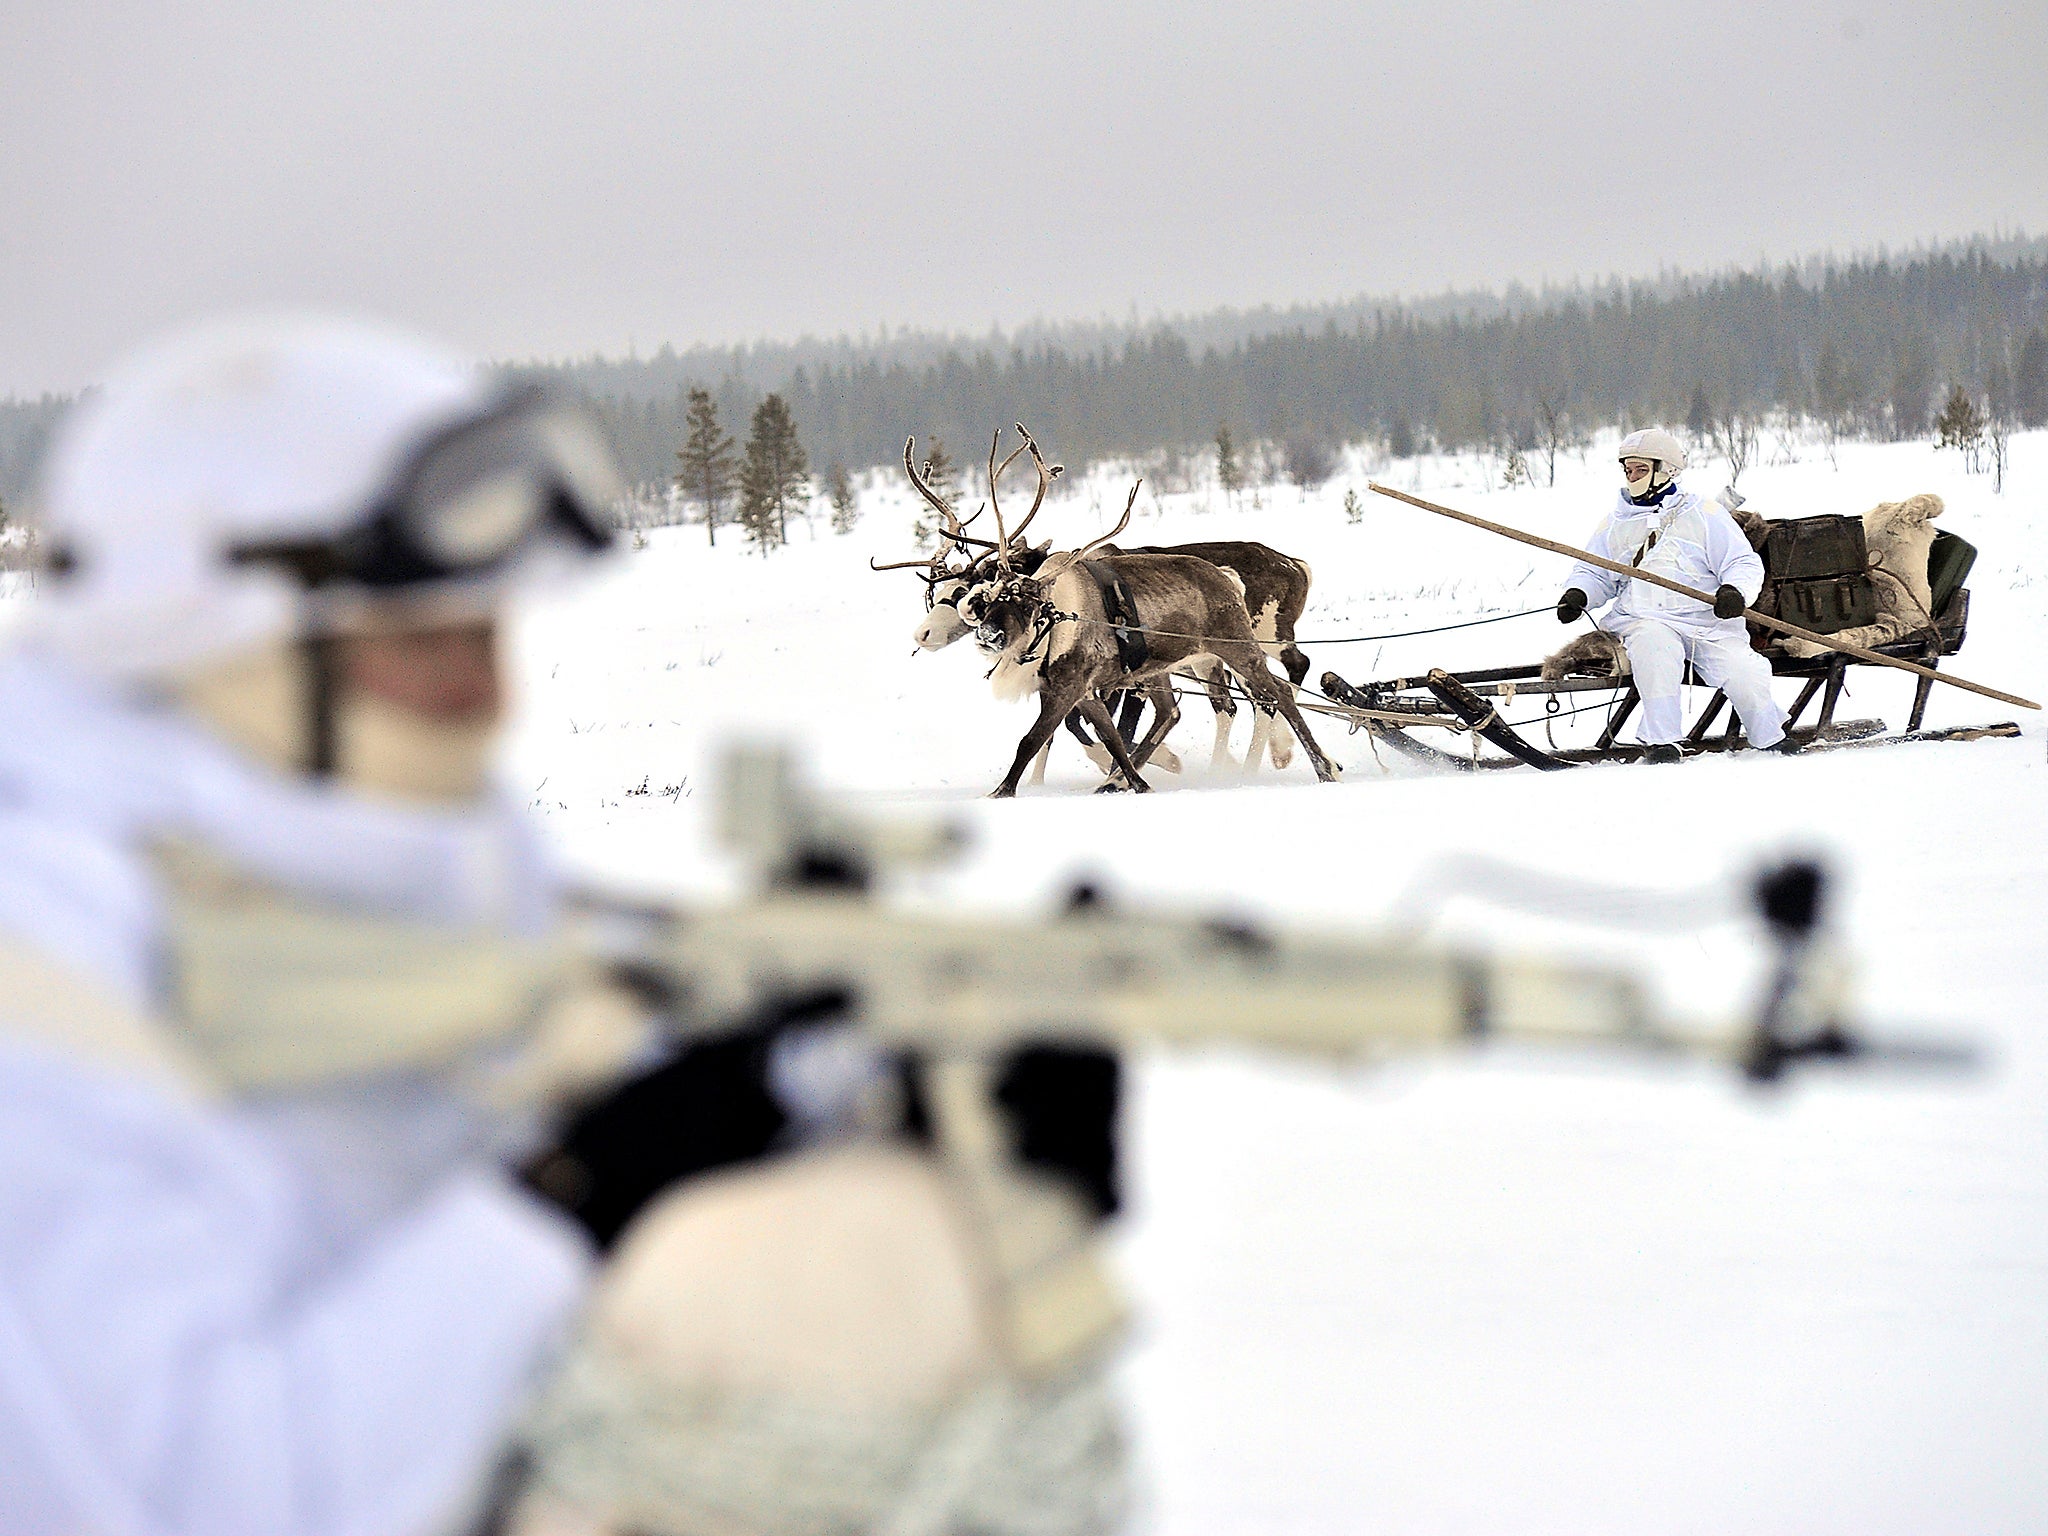 Russian servicemen of the Northern Fleet's Arctic mechanised infantry brigade participate in a military drill on riding reindeer and dog sleds near the settlement of Lovozero outside Murmansk (Reuters)